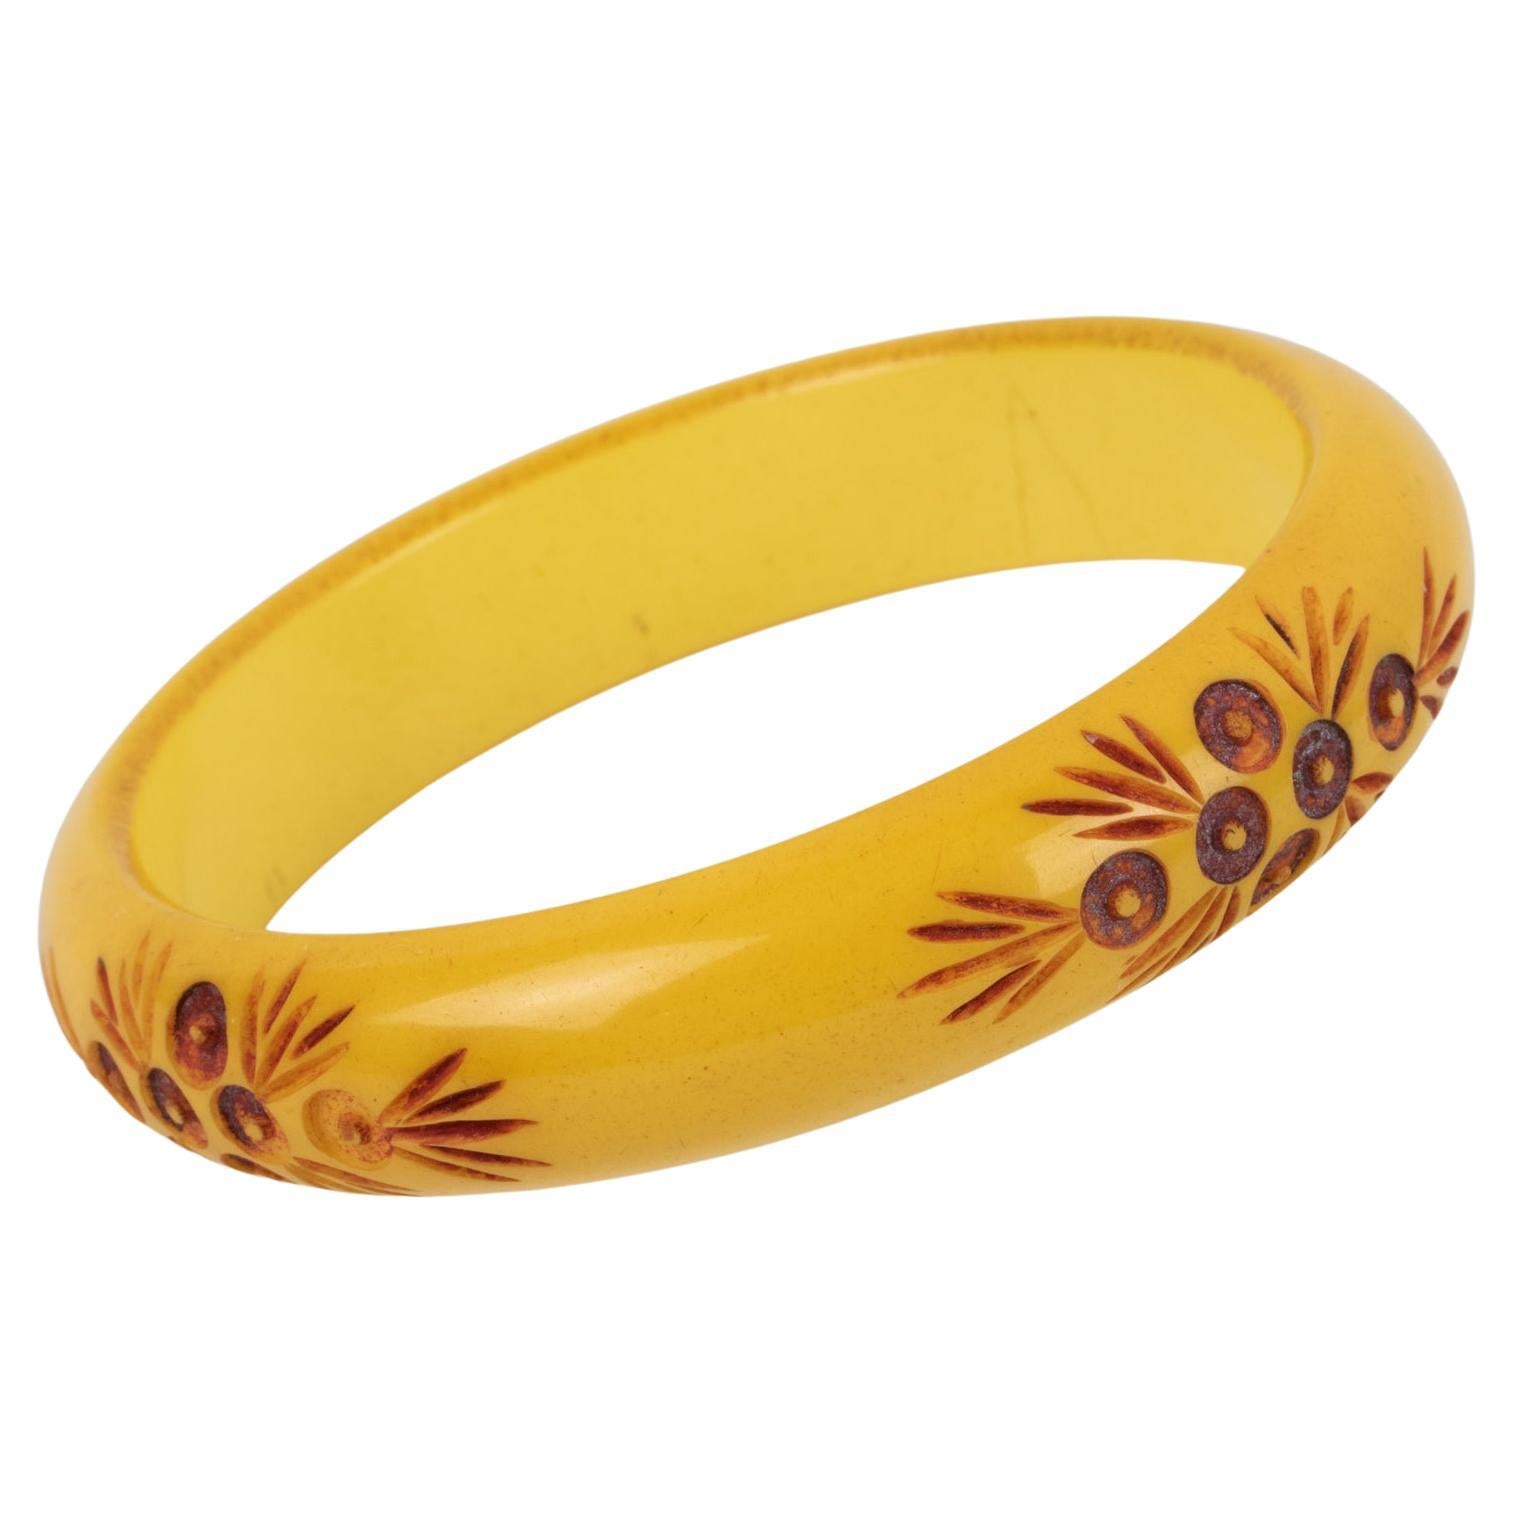 Bakelite Bracelet Bangle Yellow Creamed Corn with Carved Red Flowers For Sale